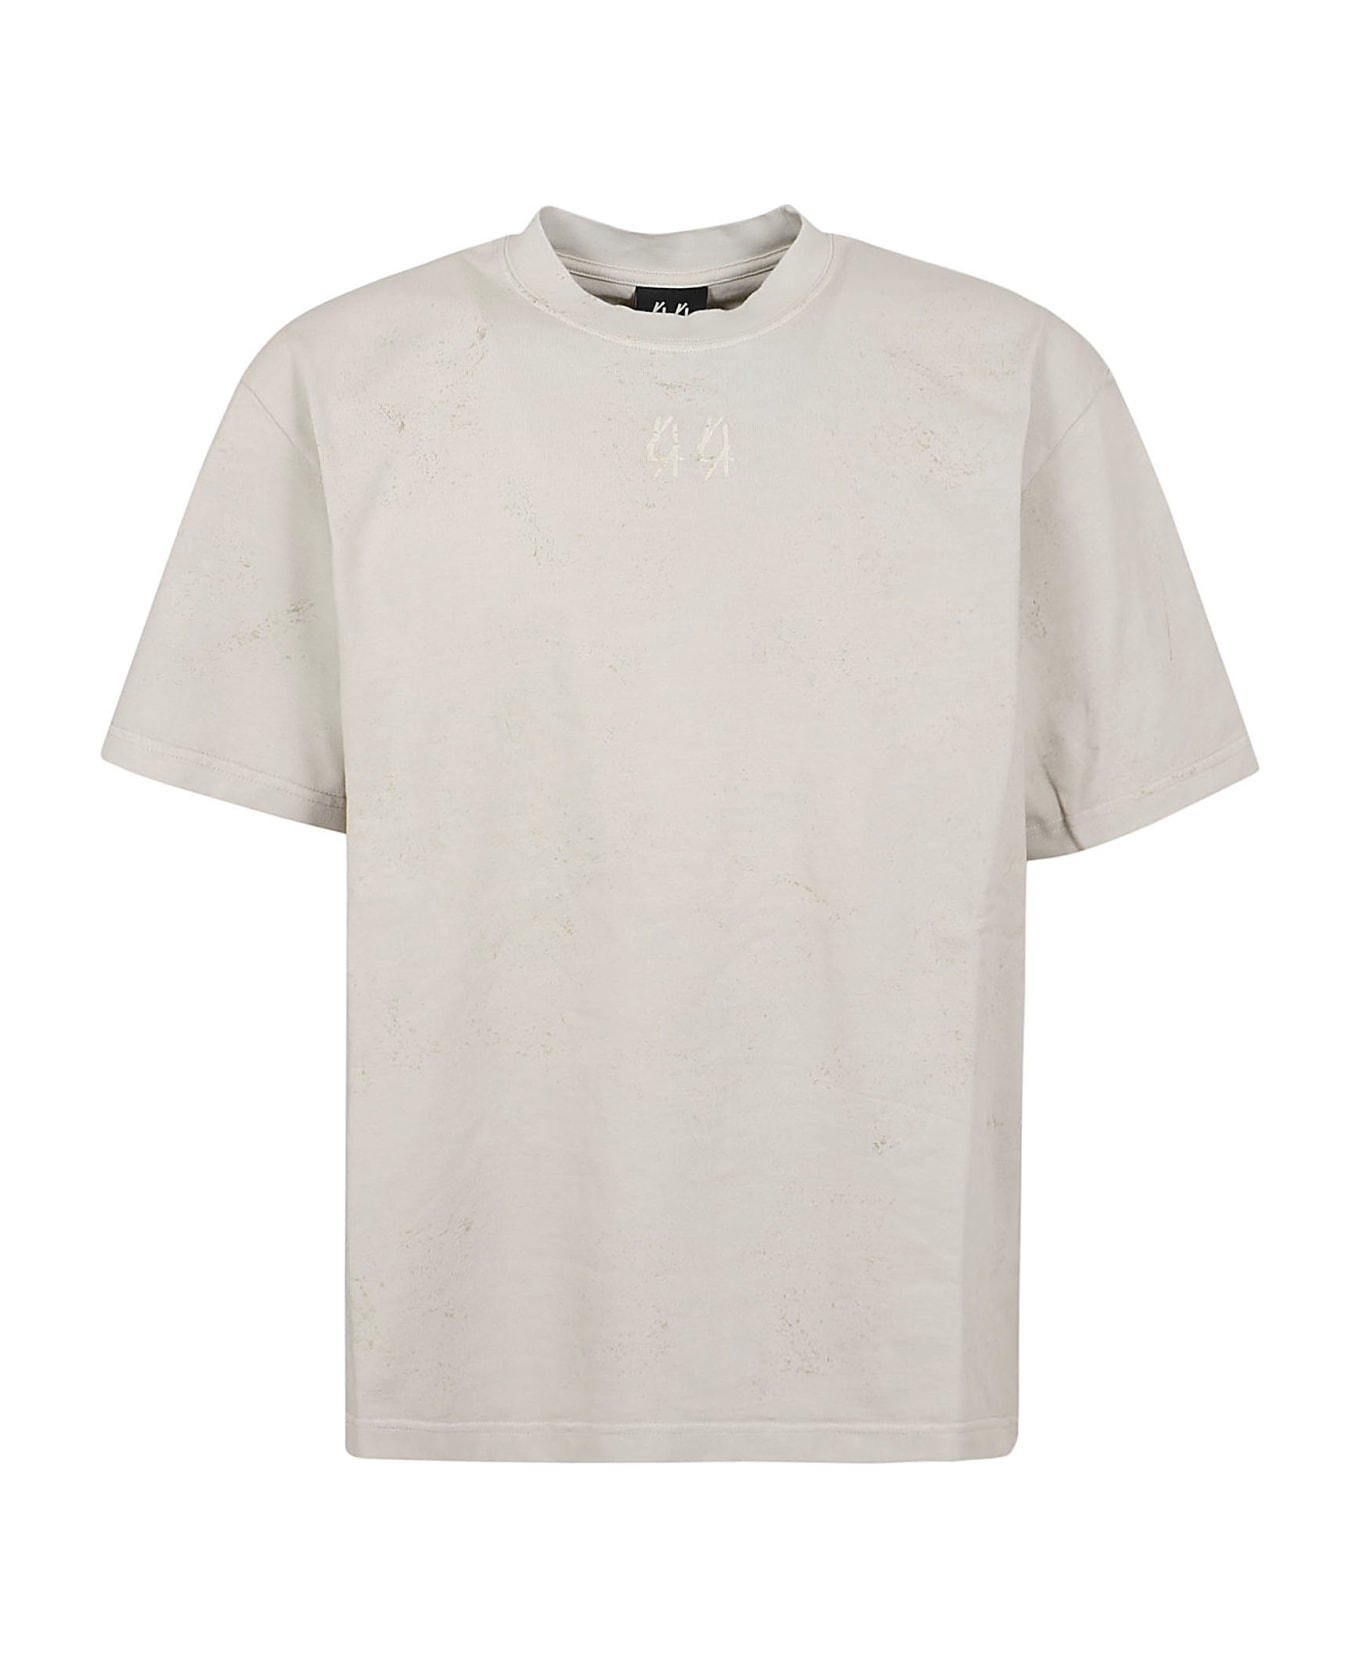 44 Label Group Trip Tee - Dirty White Gyps シャツ